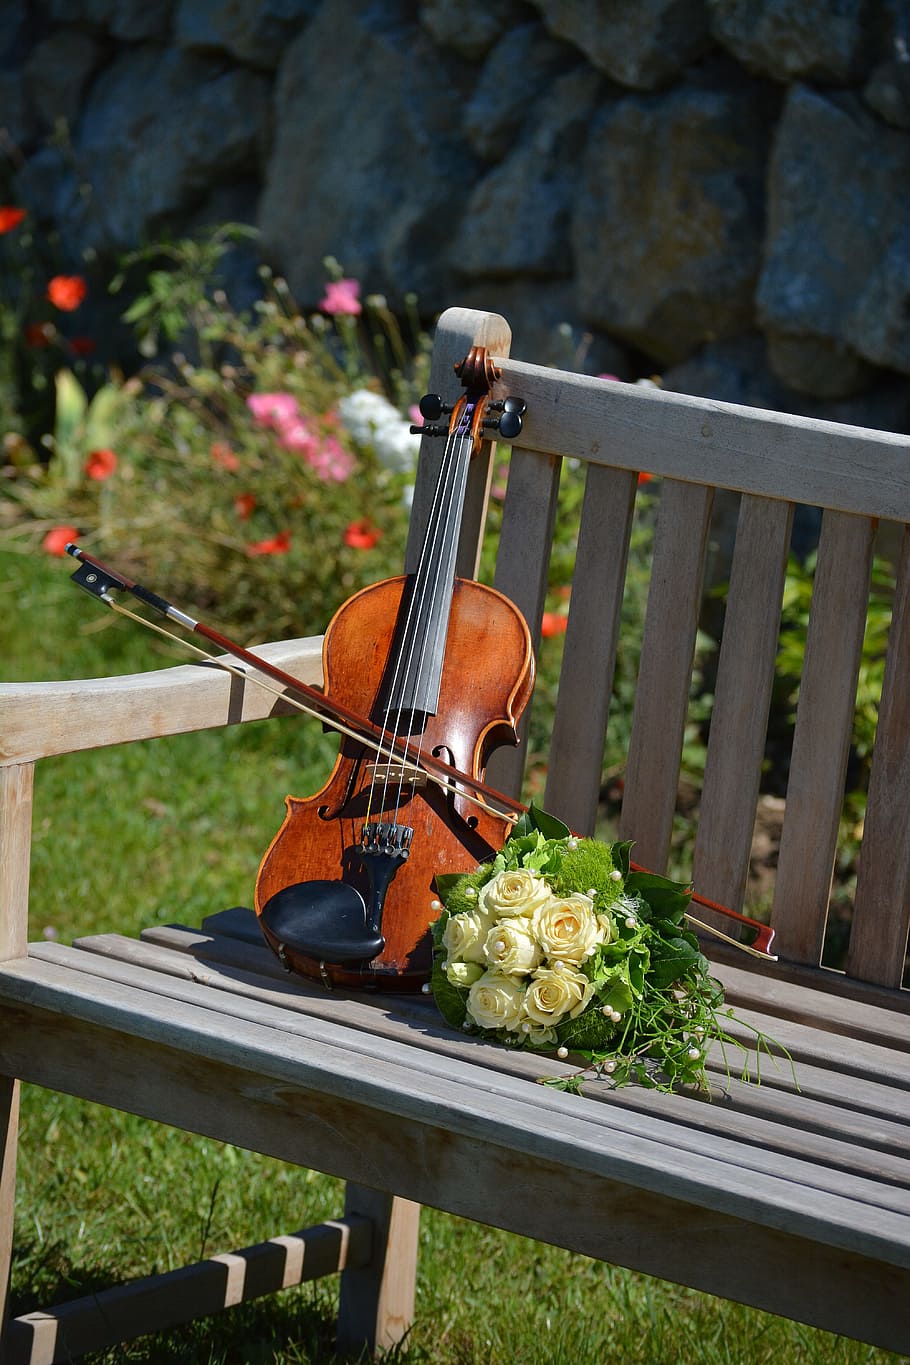 violin, bridal bouquet, wood - material, seat, music, bench, nature, musical instrument, day, string instrument